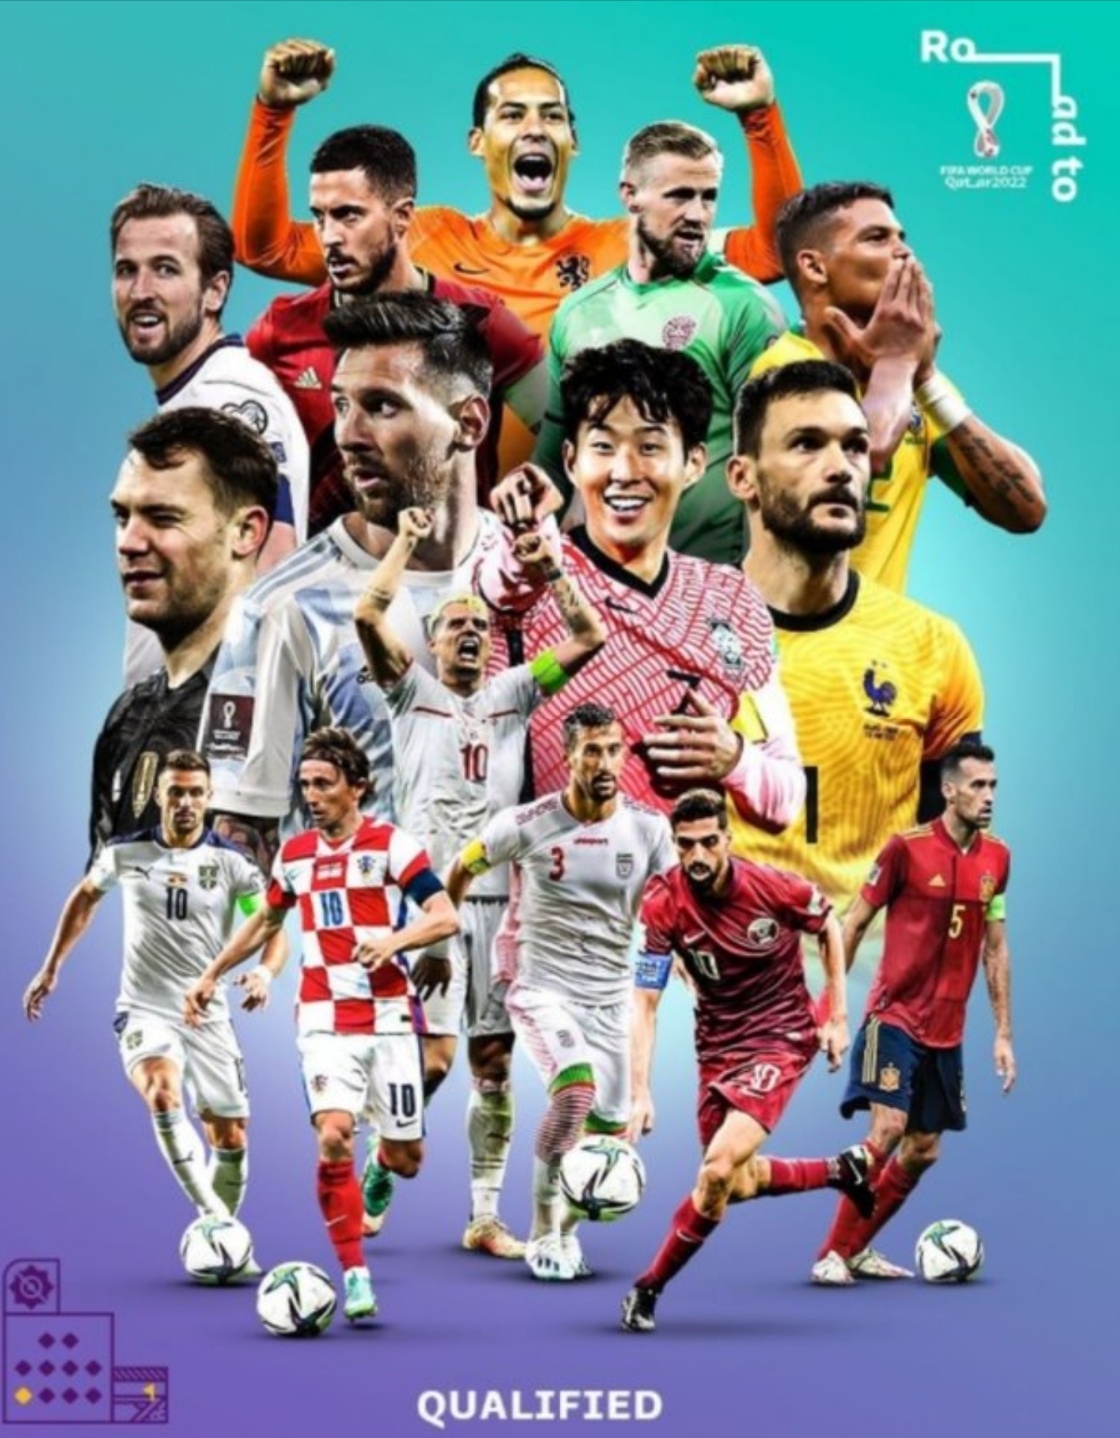 Our excitement on the World Cup poster.